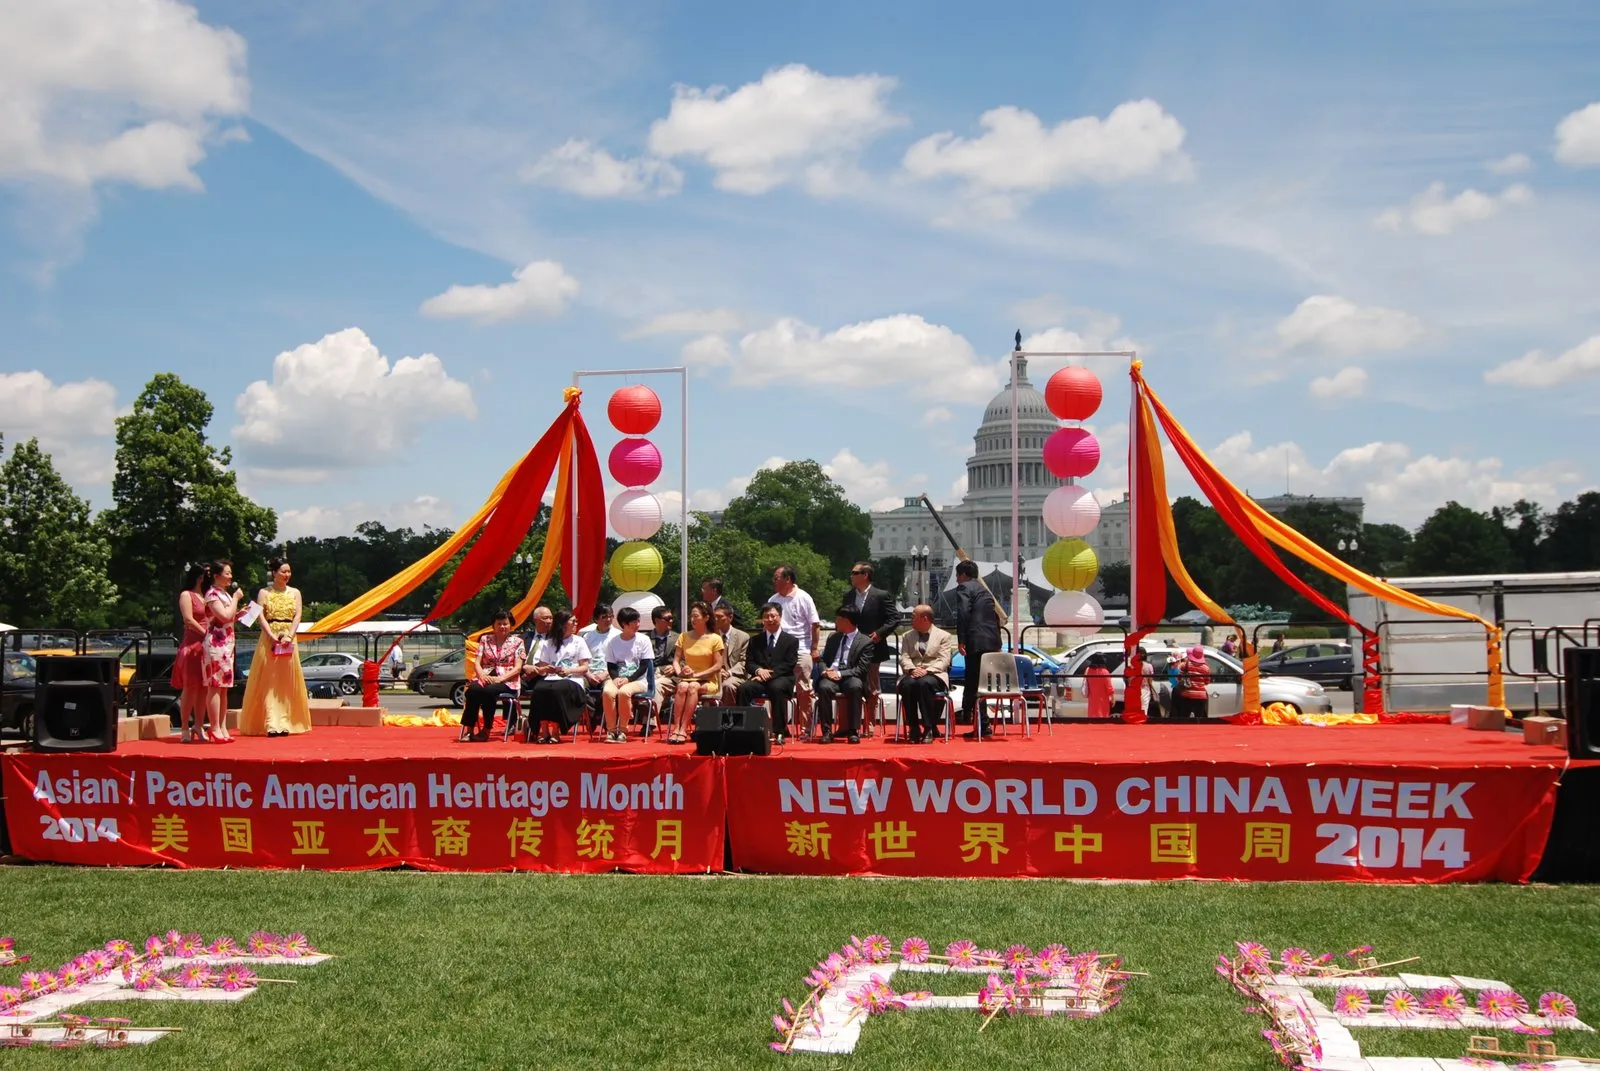 NWCL organises the 「New World China Week」  campaign in Washington D.C., U.S.A., to promote intangible cultural heritage.